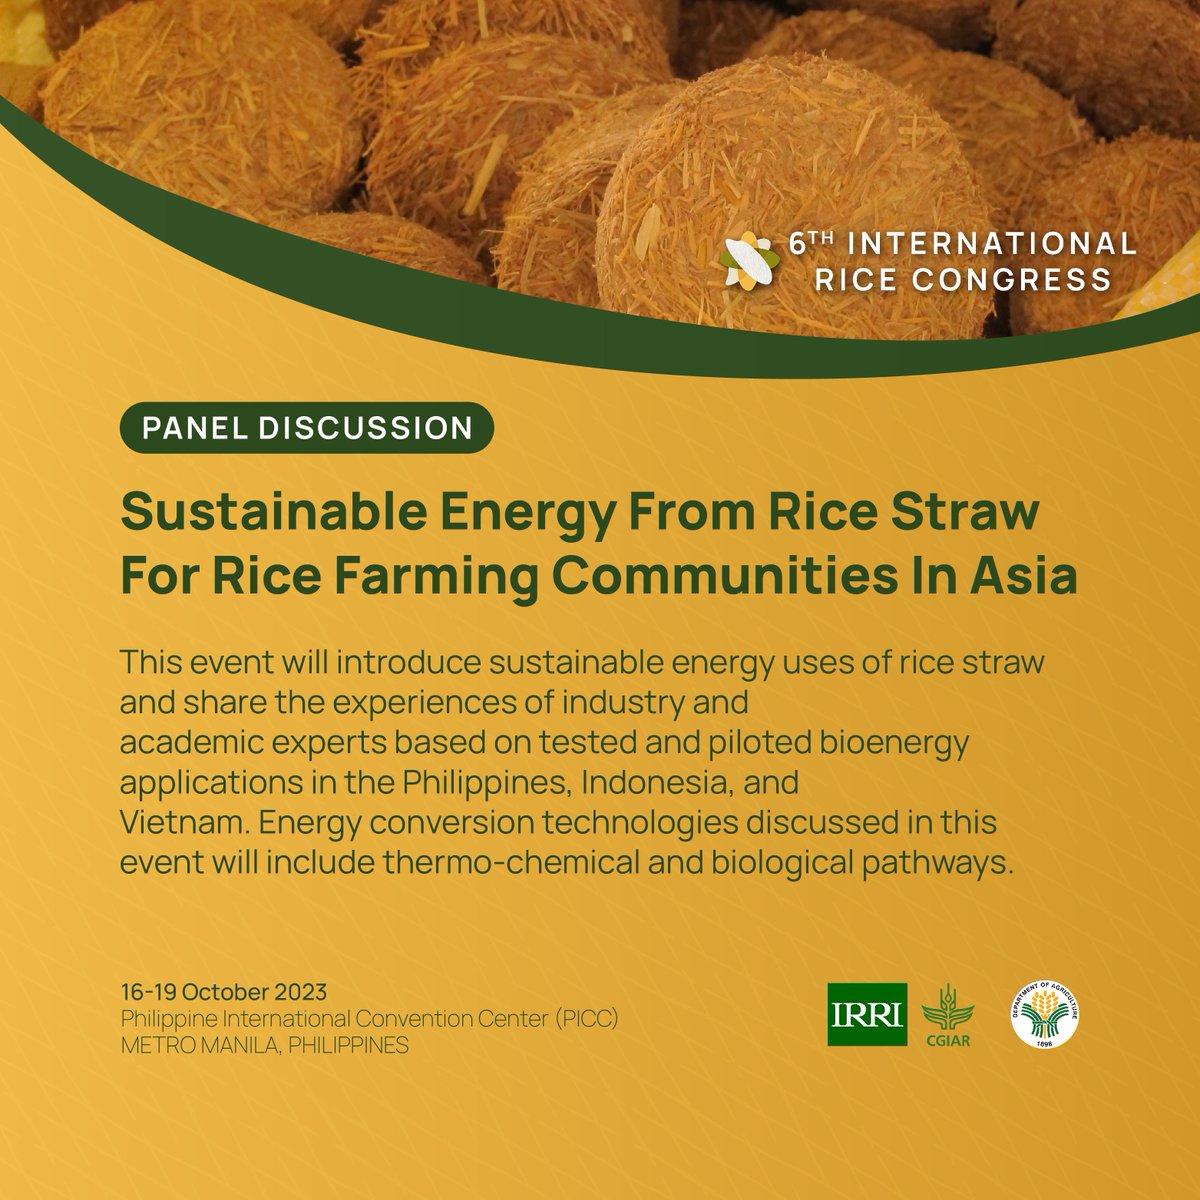 #CONVERSE w/ us at #IRC2023 as we explore SUSTAINABLE ENERGY FROM RICE STRAW FOR RICE FARMING COMMUNITIES IN ASIA Listen to the independent research findings on bioenergy & discover how these interventions can help address SDGs. REGISTER at bit.ly/FBregIRC #GeneToGlobe